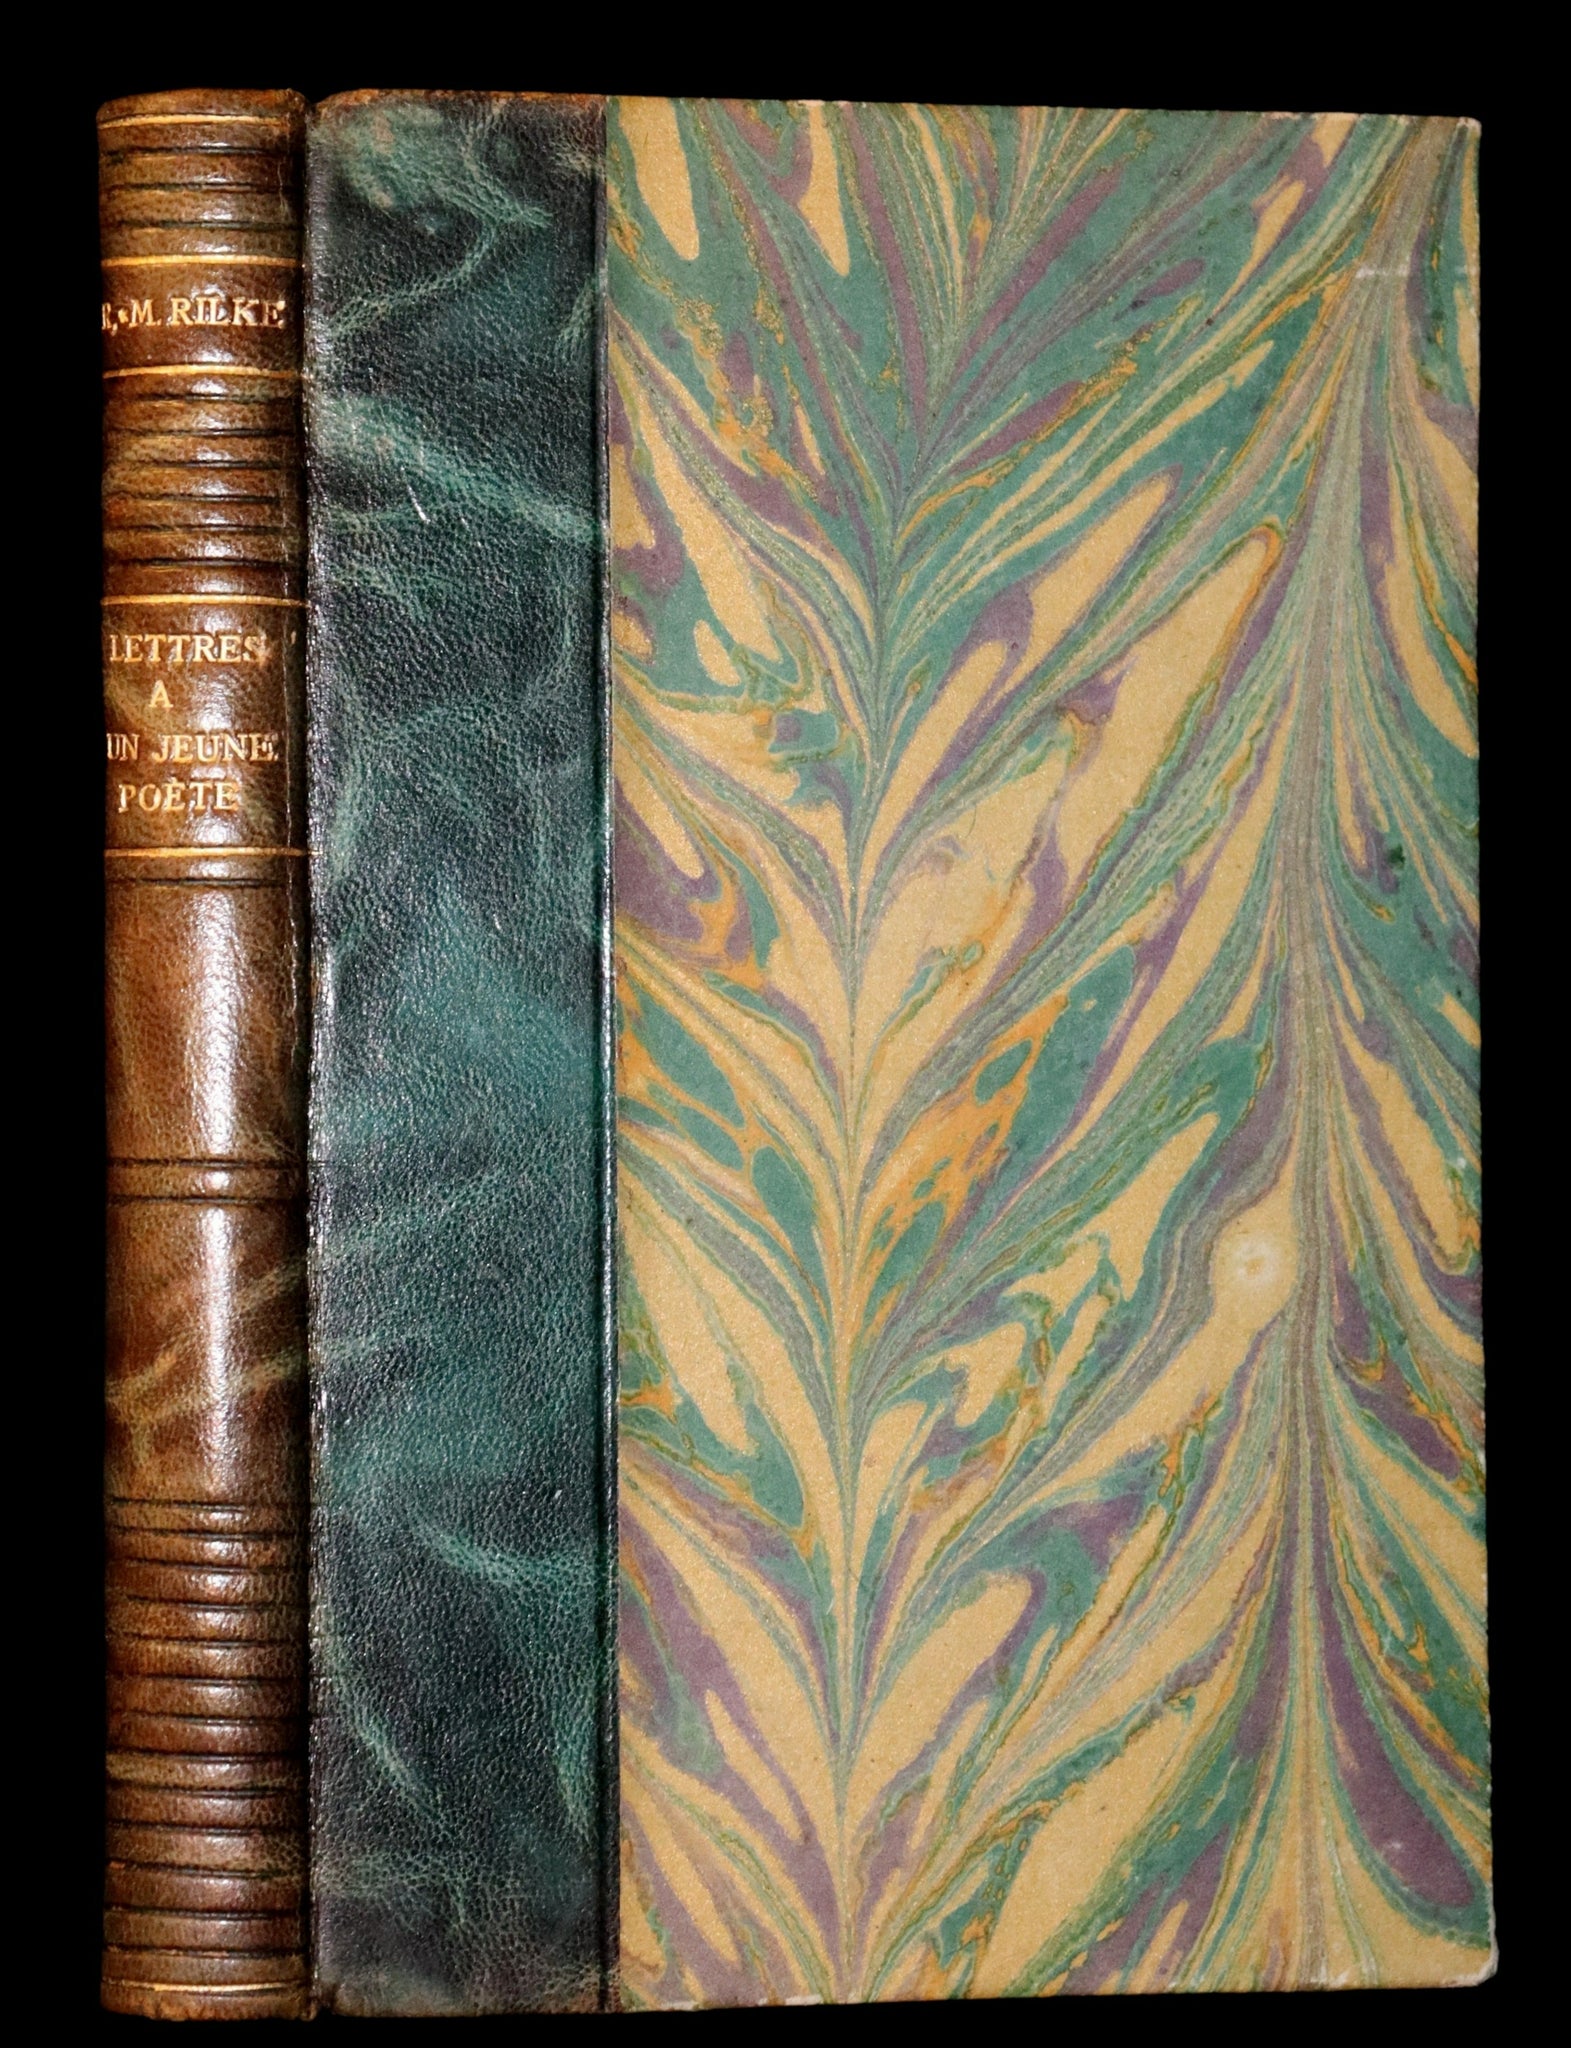 1937 Rare French First Edition - Lettres à un Jeune Poète (Letters to a Young Poet) by Rainer Maria Rilke. #435.